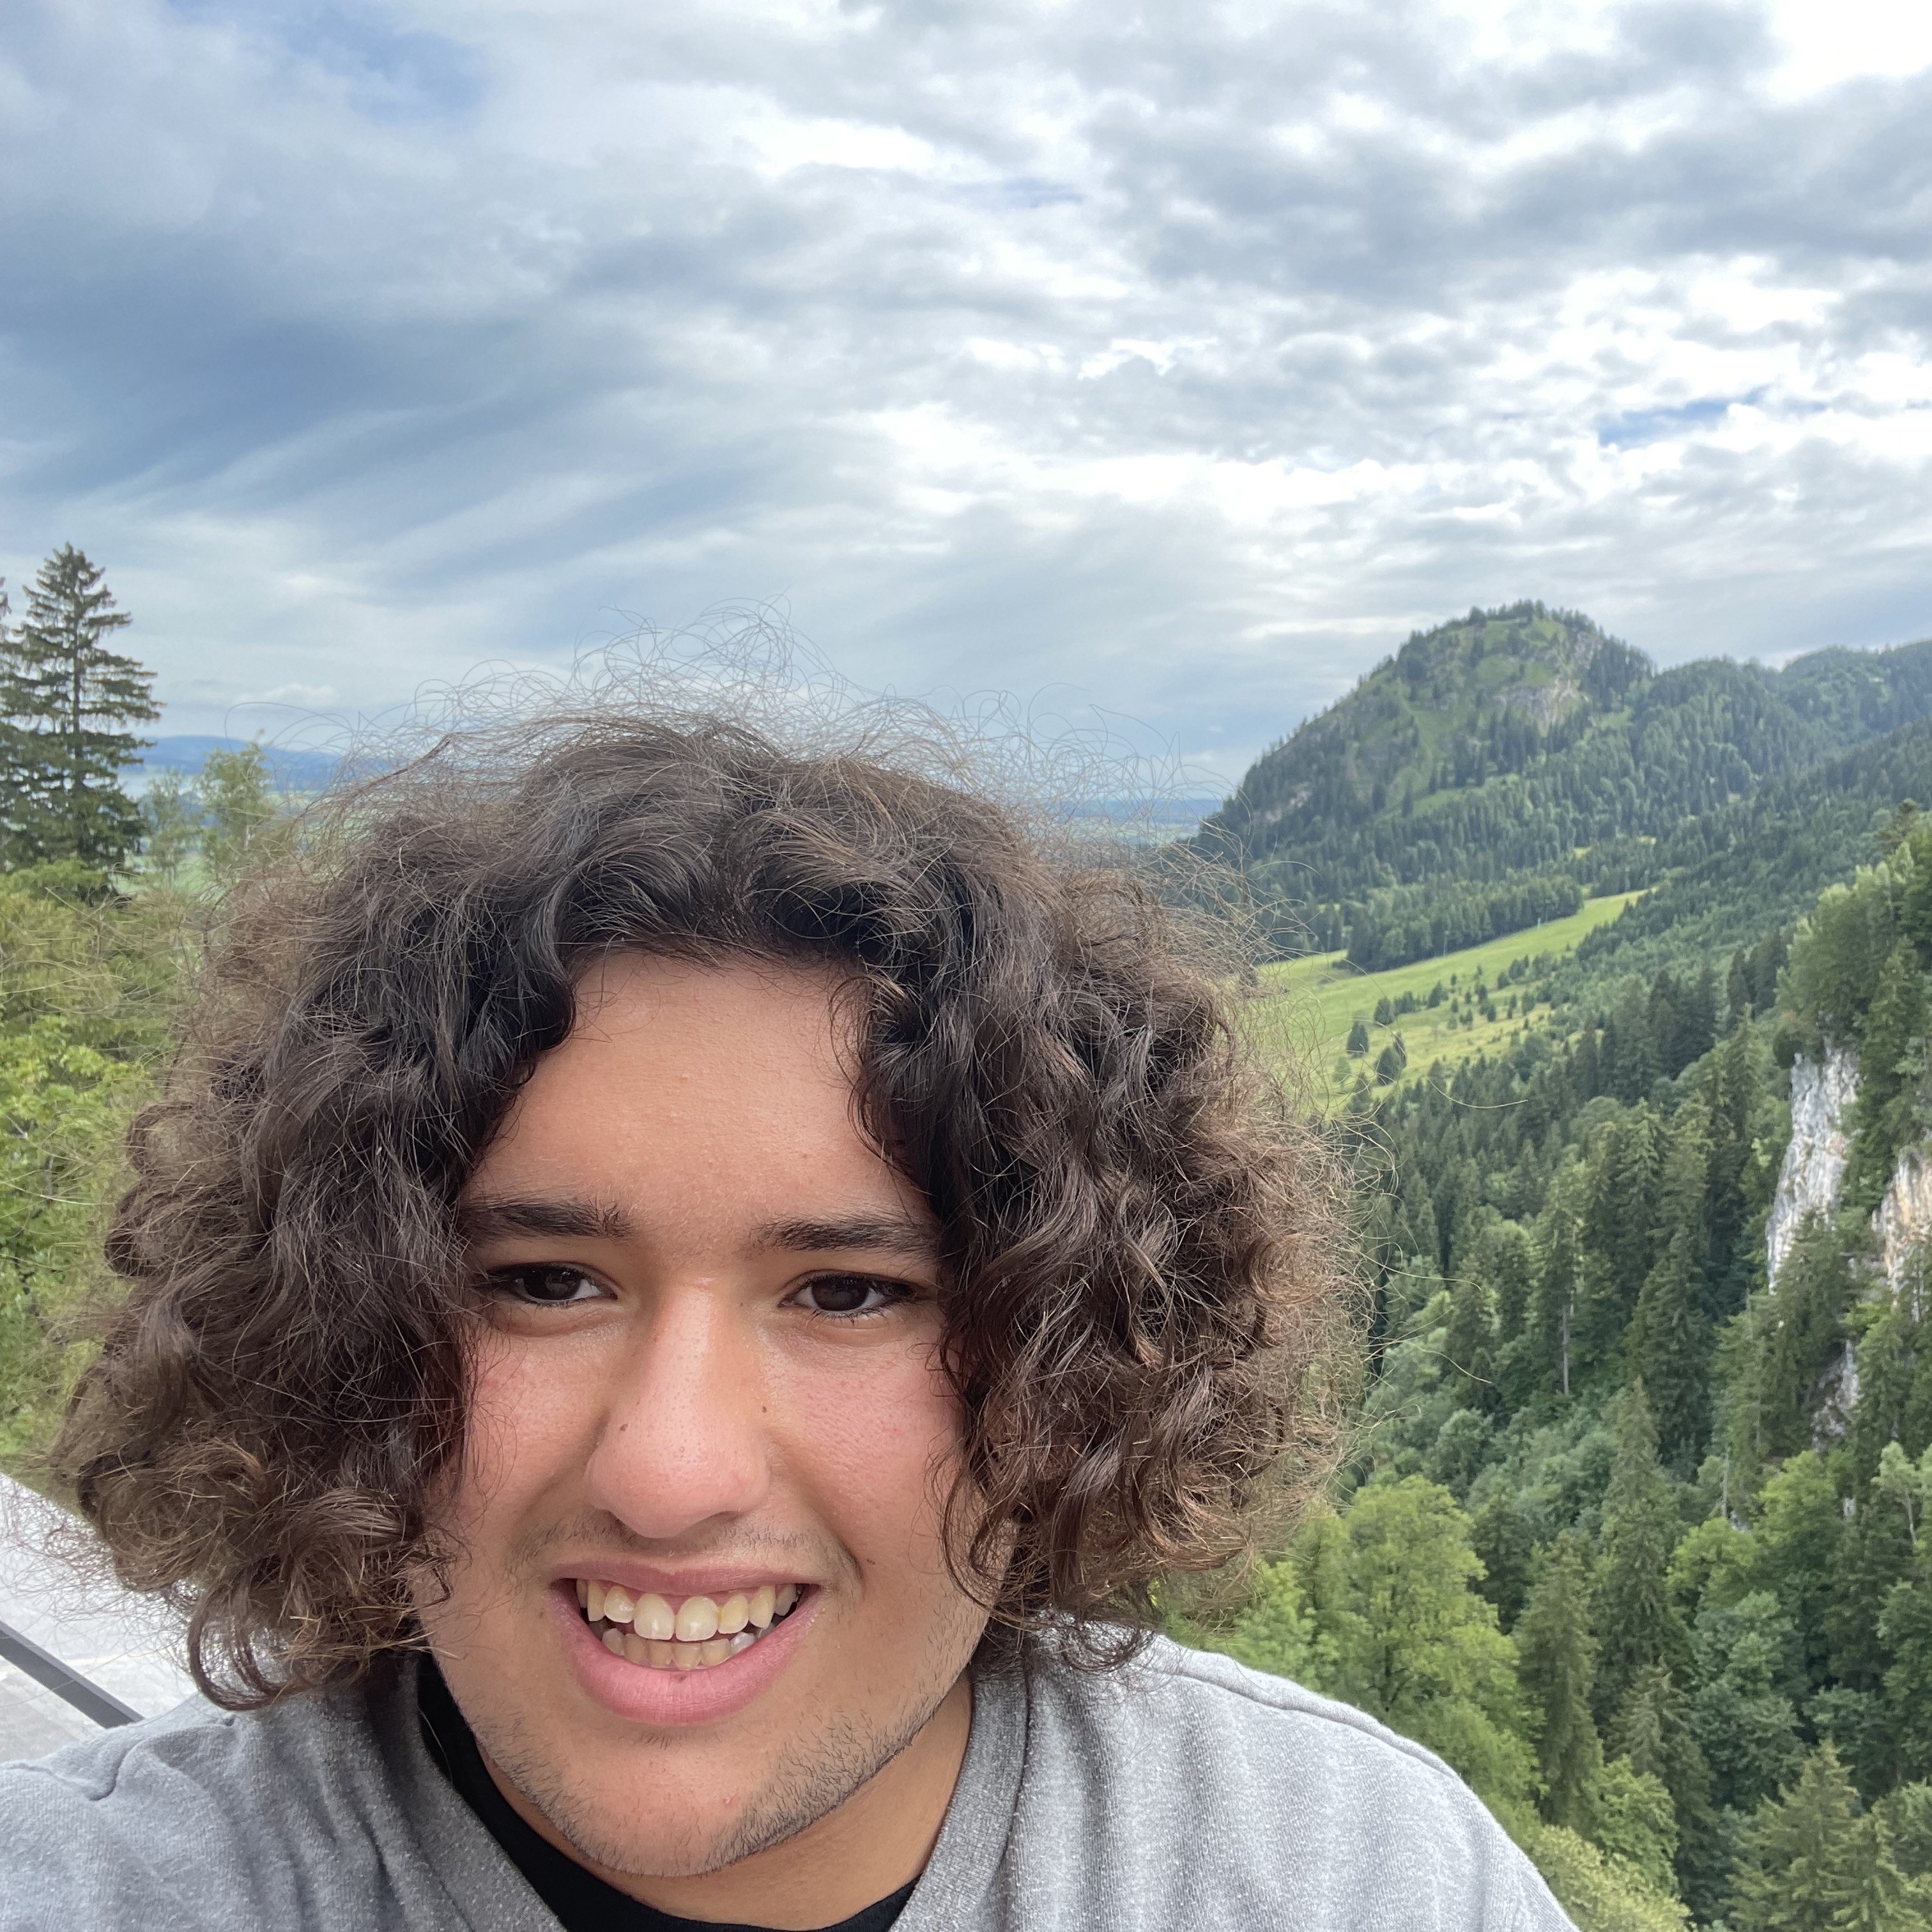 Yanni is a third year electrical engineering major and currently serves as the electronic subteam leader for the AutoAquaponics project and ESW Co-President. He joined ESW because he is passionate about sustainability and believes that engineers have a responsibility to use their skills to better humanity and the planet.LINKEDINLINKhttps://www.linkedin.com/in/yanni-wilcox-508104233